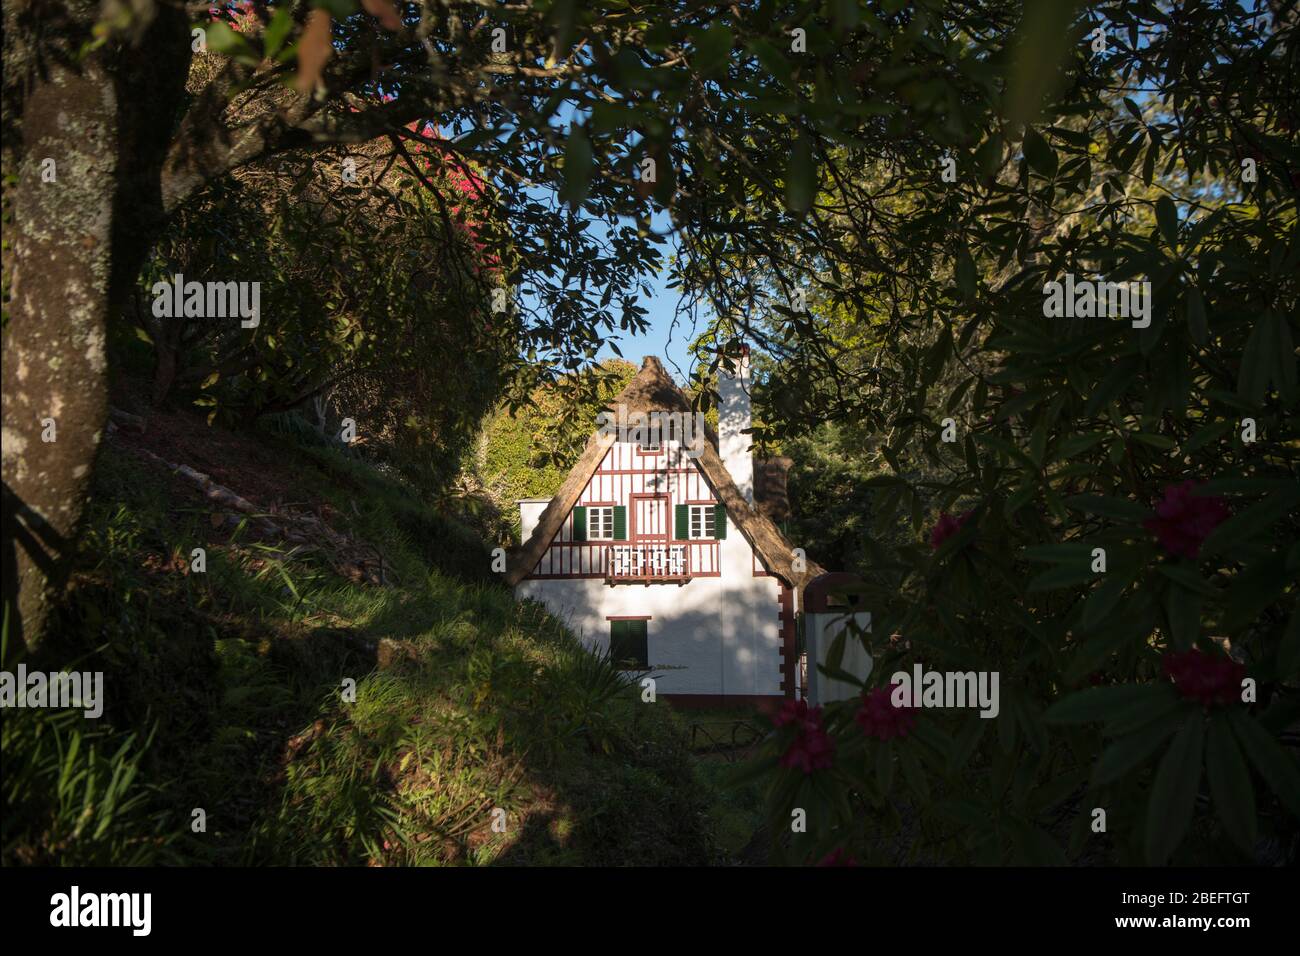 the Guesthouse at the Natural Park of Queimadas in Central Madeira on the Island Madeira of Portugal.   Portugal, Madeira, April 2018 Stock Photo